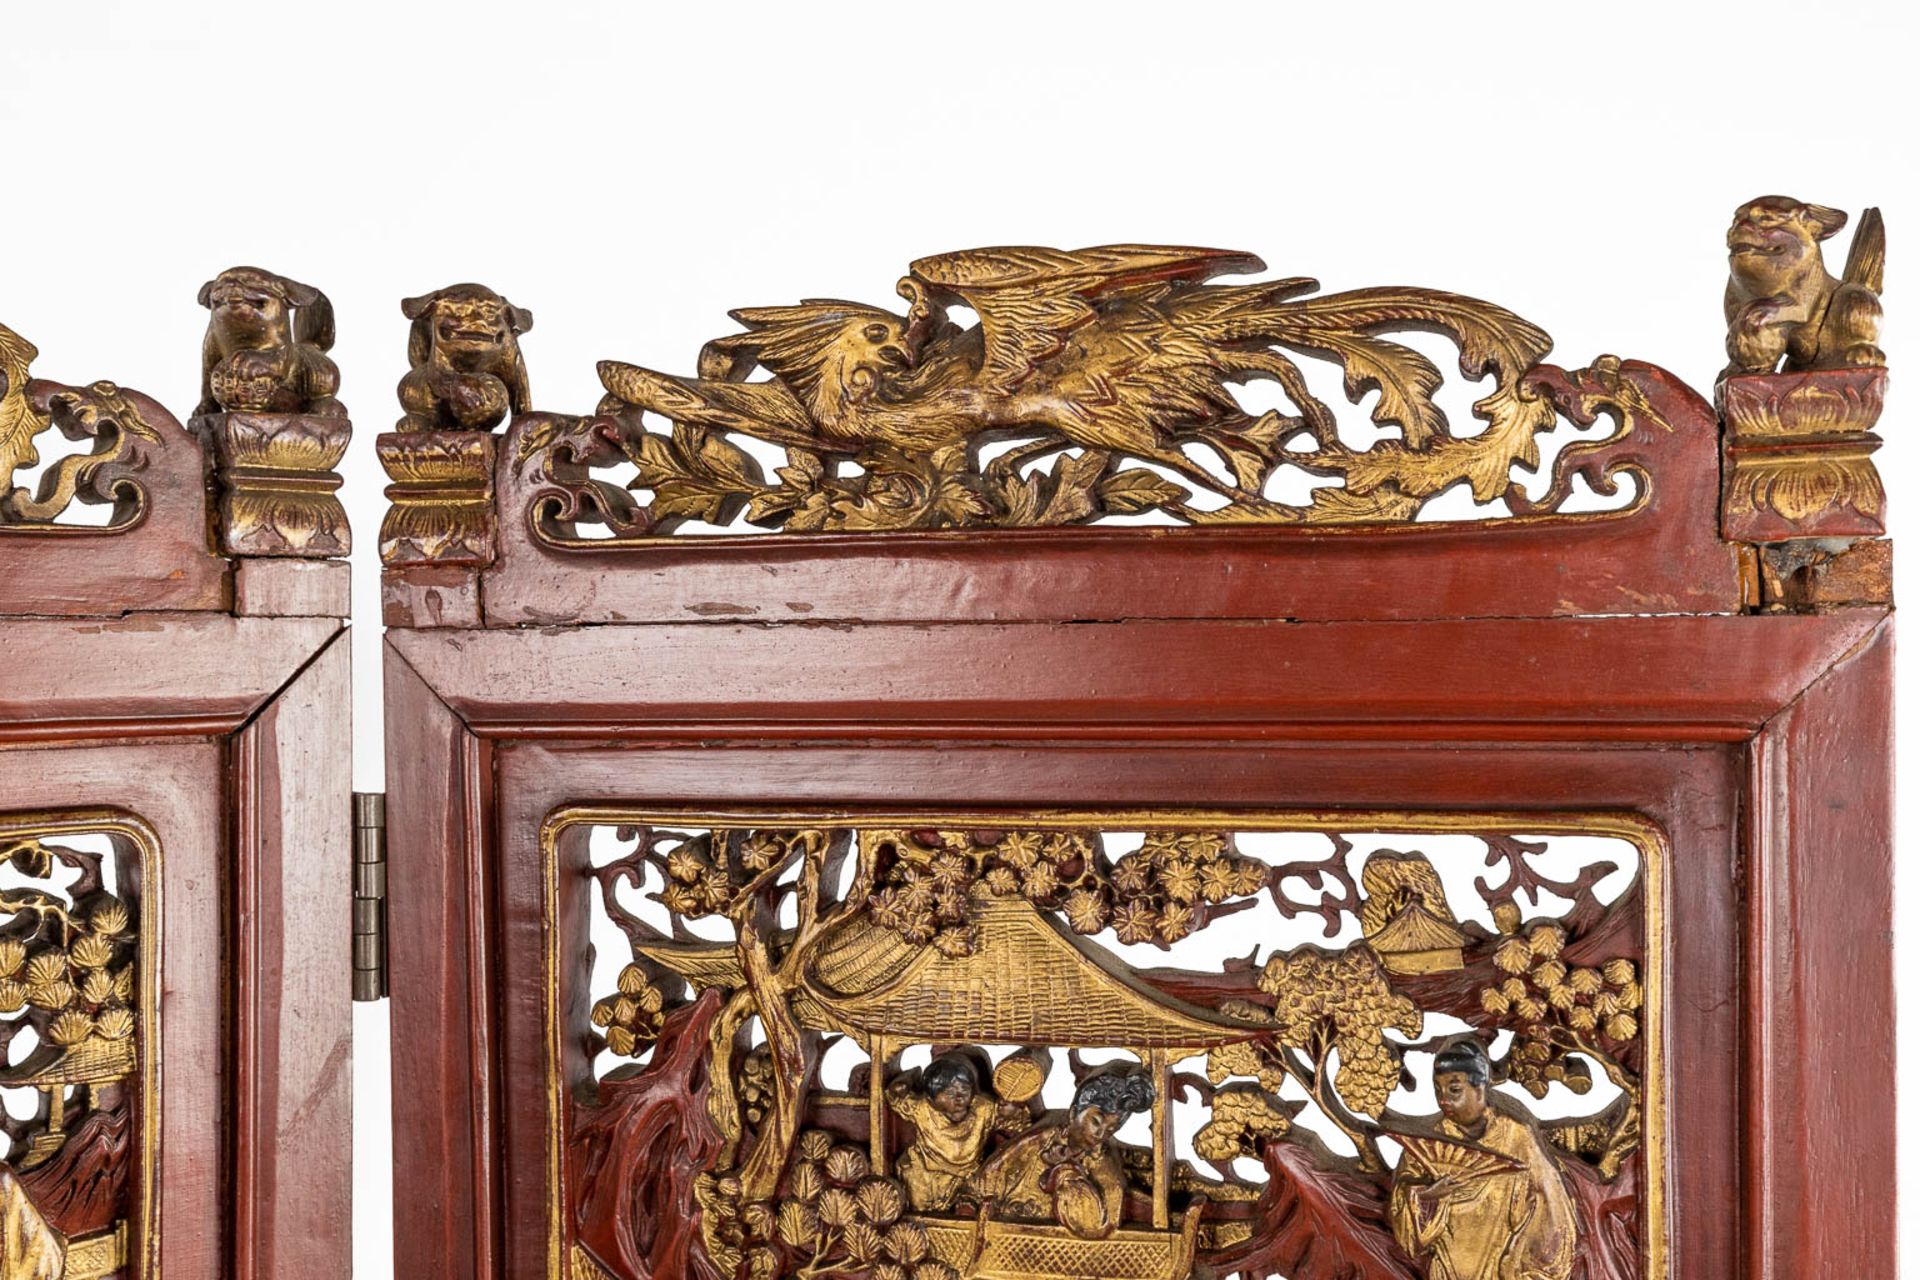 A 4-piece Chinese room divider, sculptured hardwood panels, circa 1900. (W:162 x H:185 cm) - Image 10 of 12